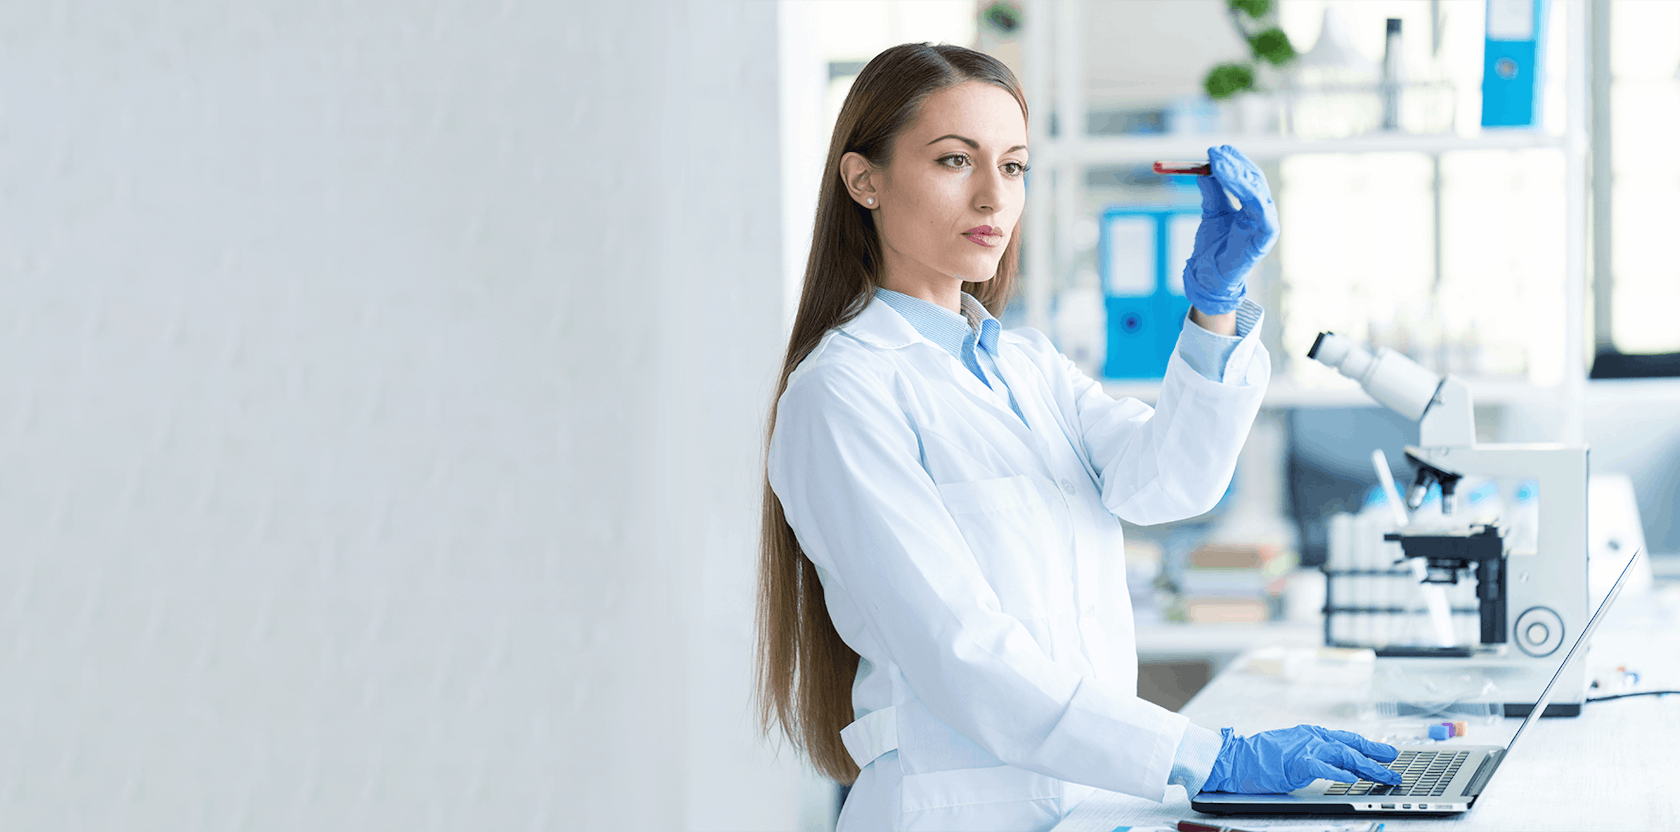 young female scientist using laptop and microscope in laboratory picture